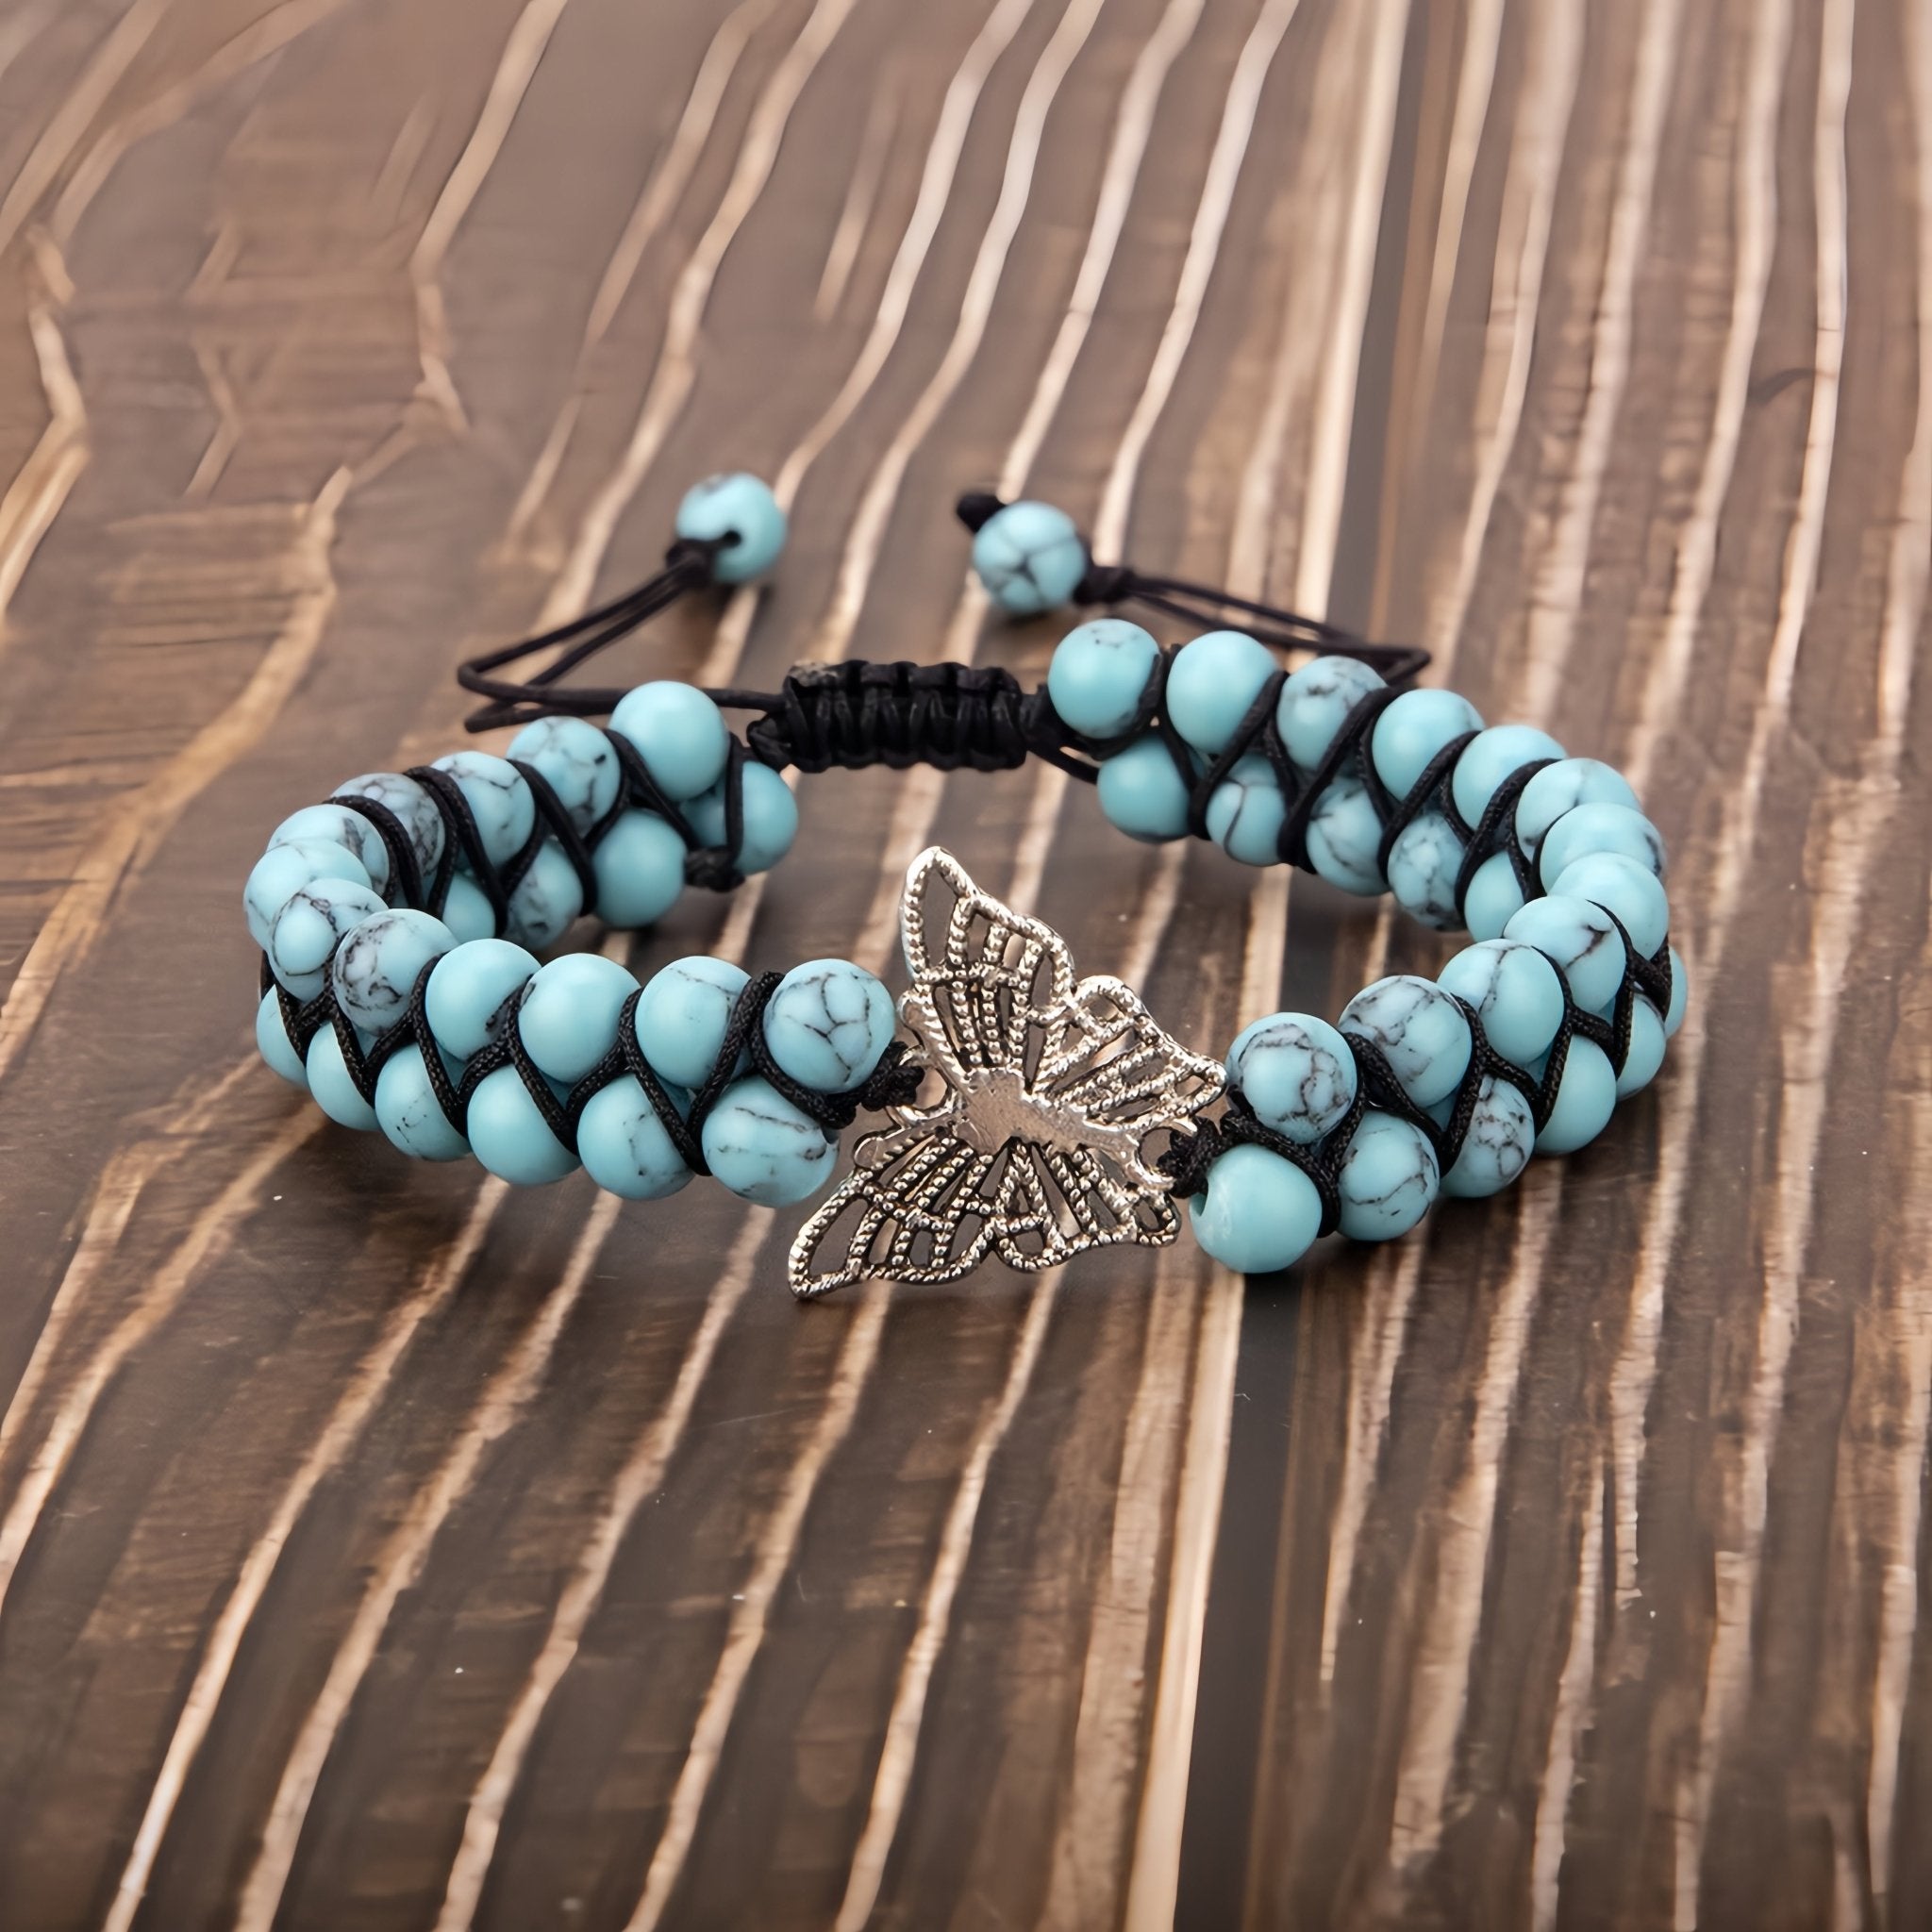 Handcrafted turquoise double-row yoga bracelet, adorned with a silver butterfly charm.